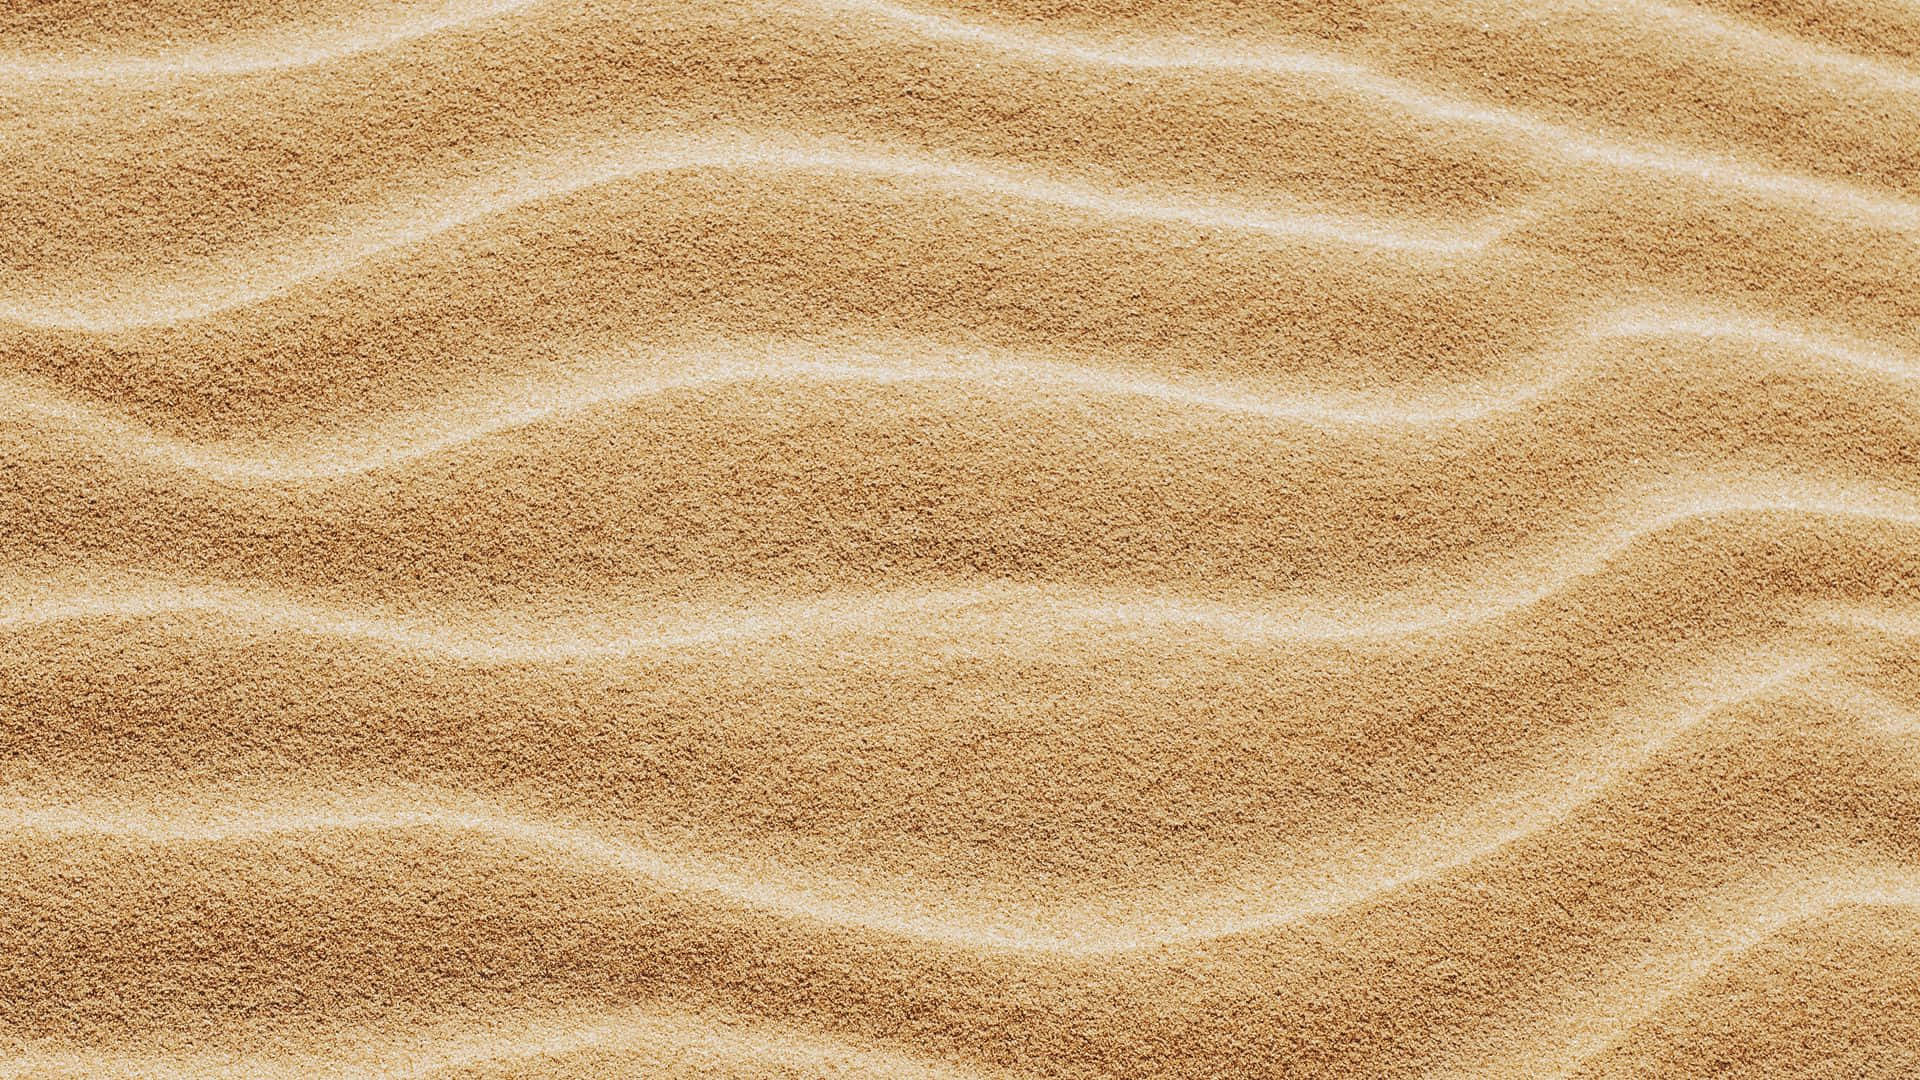 Nature’s Abstract Art: A Beach of Sand